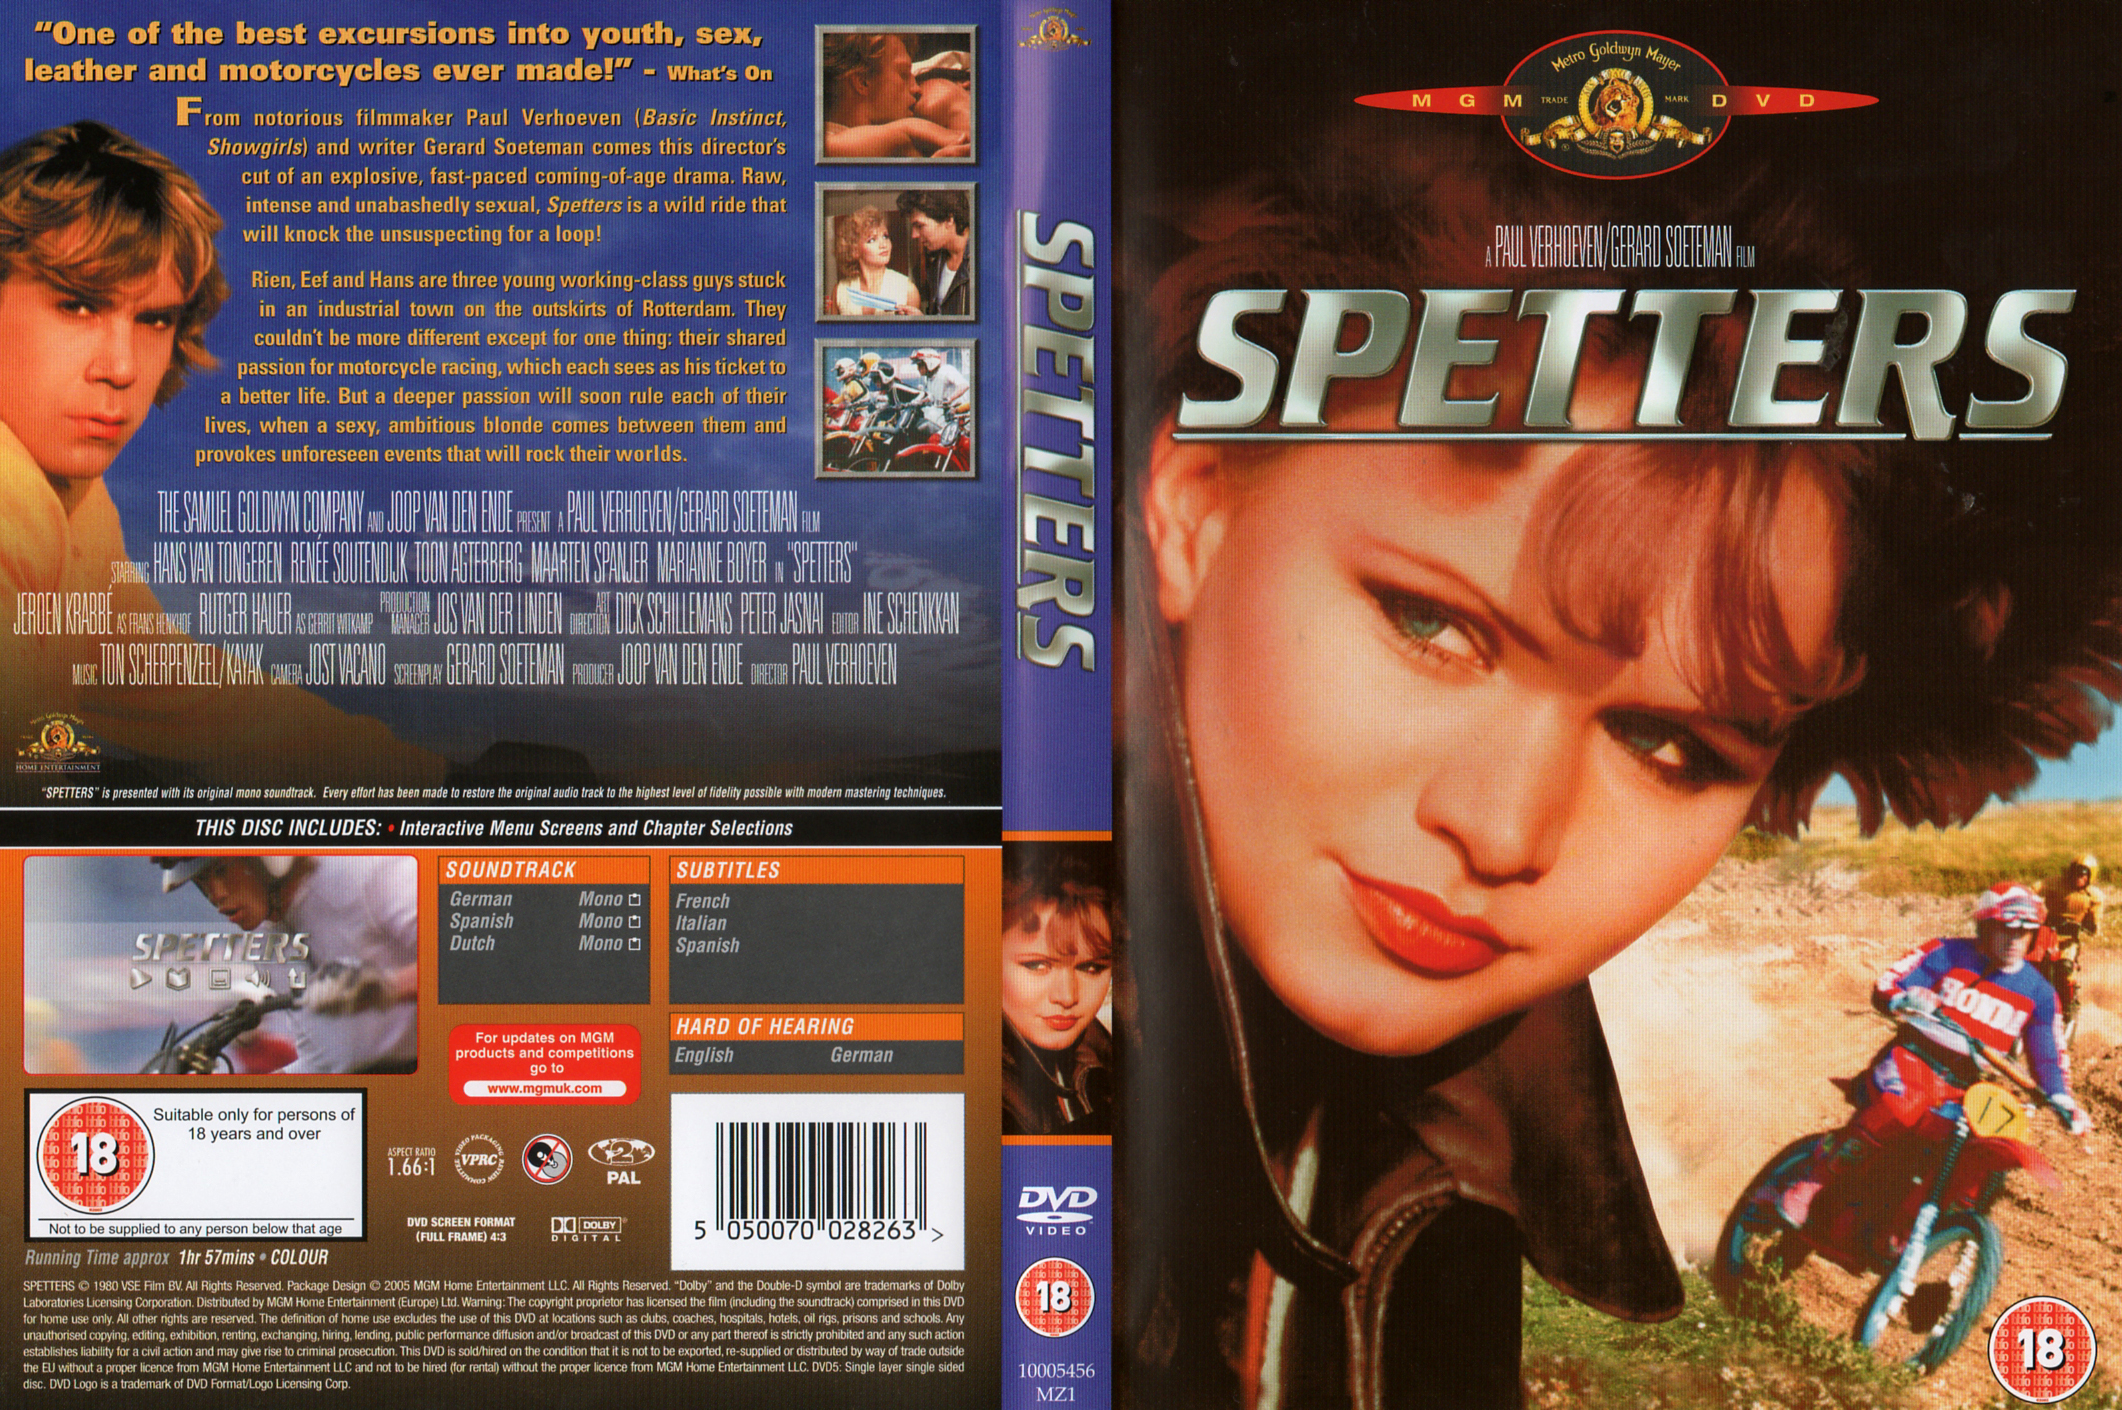 Jaquette DVD Spetters Zone 1